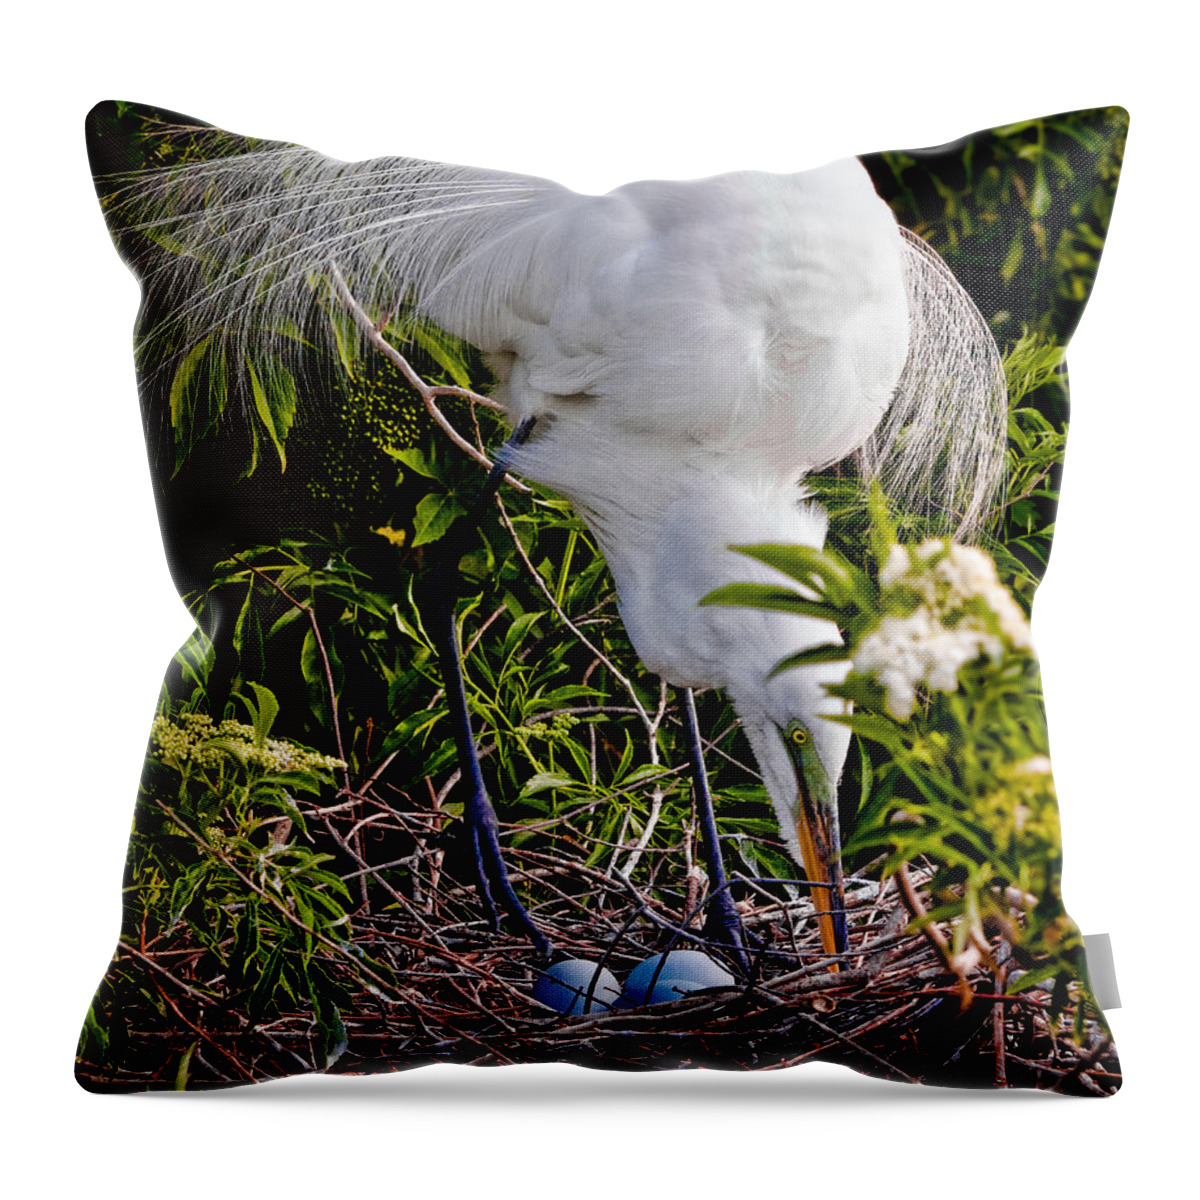 Art Throw Pillow featuring the photograph A Little Housekeeping by Christopher Holmes